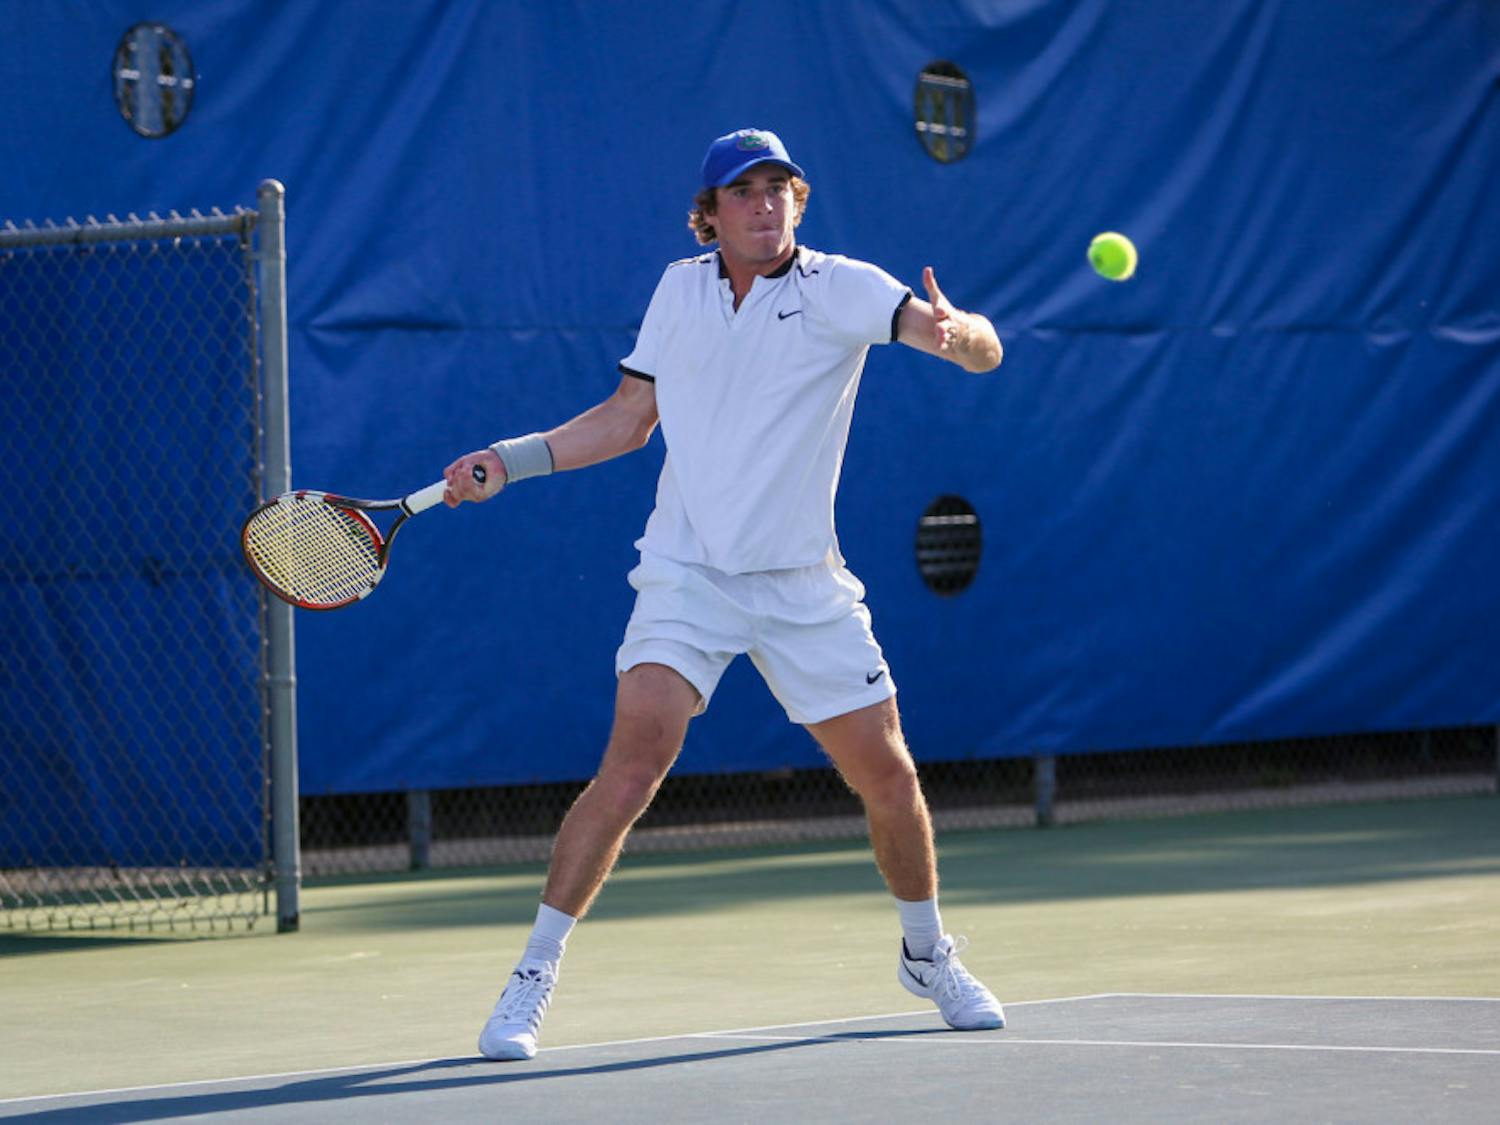 Oliver Crawford clinched the Florida men’s tennis team’s 4-3 upset win over Wake Forest last season.&nbsp;The No. 8 Gators face the No. 2 Demon Deacons Wednesday at 5 p.m.